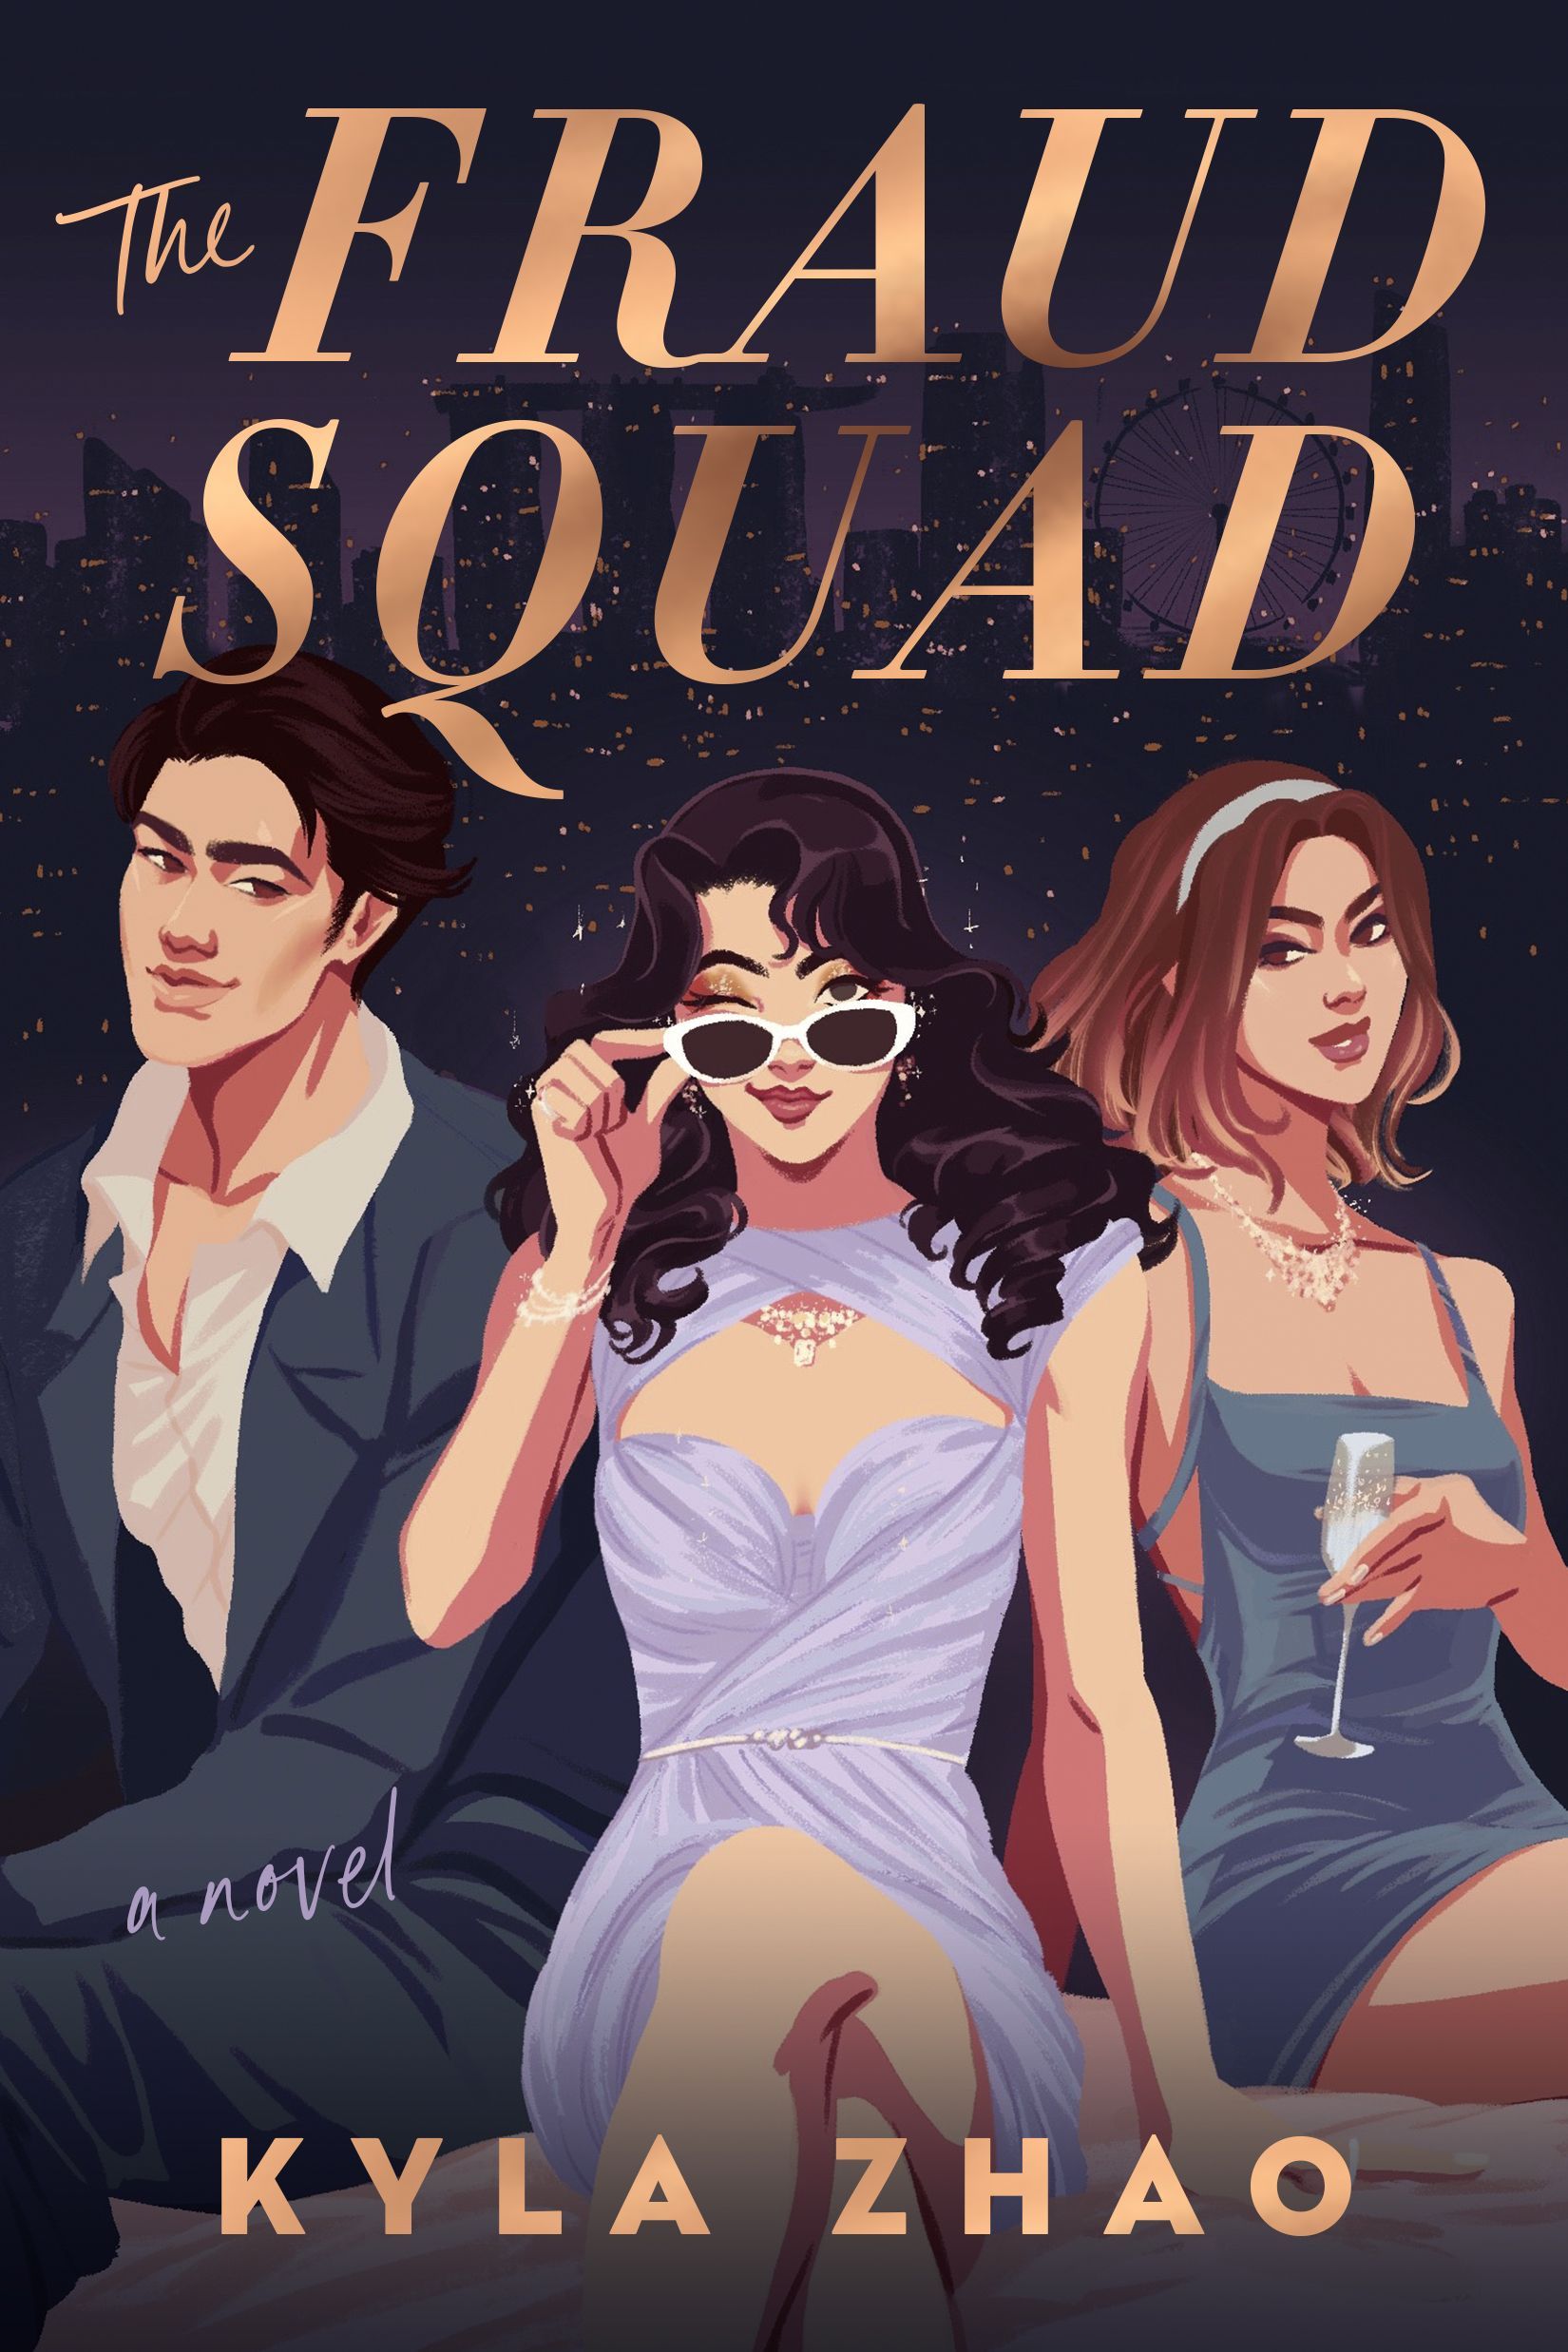 'The Fraud Squad' by Kyla Zhao